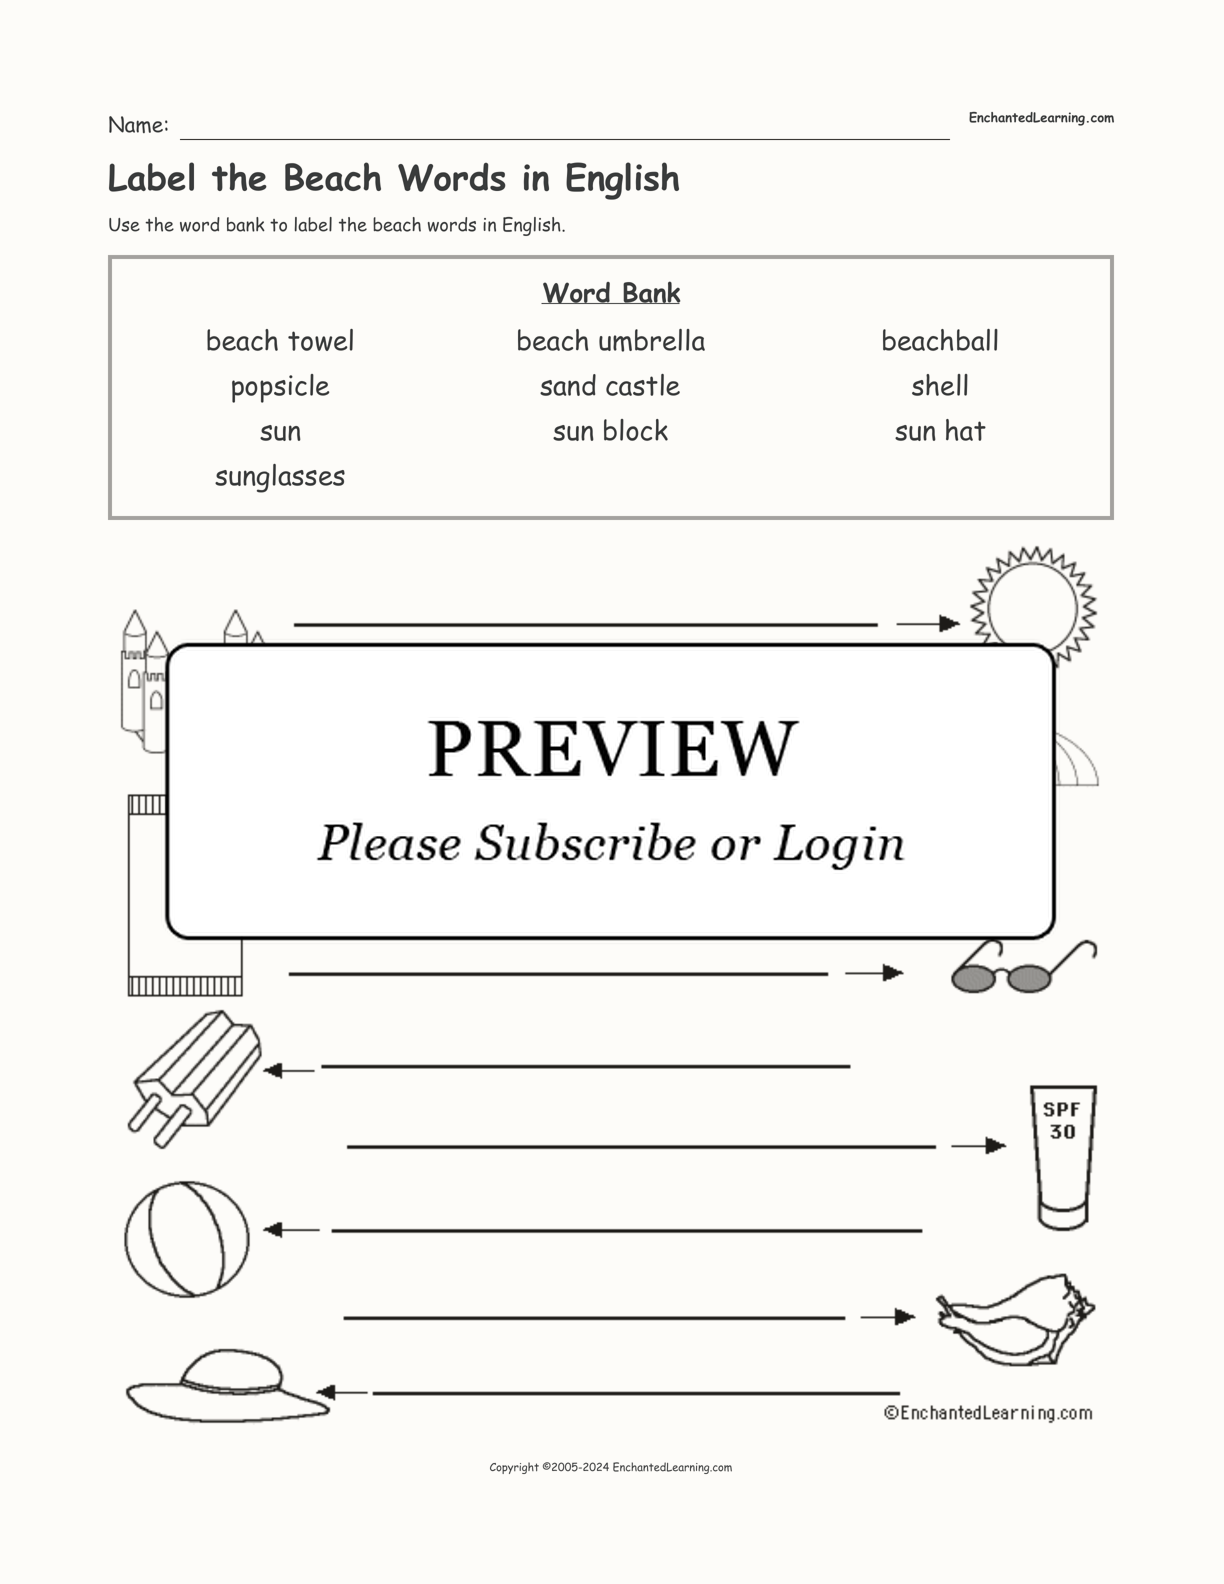 Label the Beach Words in English interactive worksheet page 1